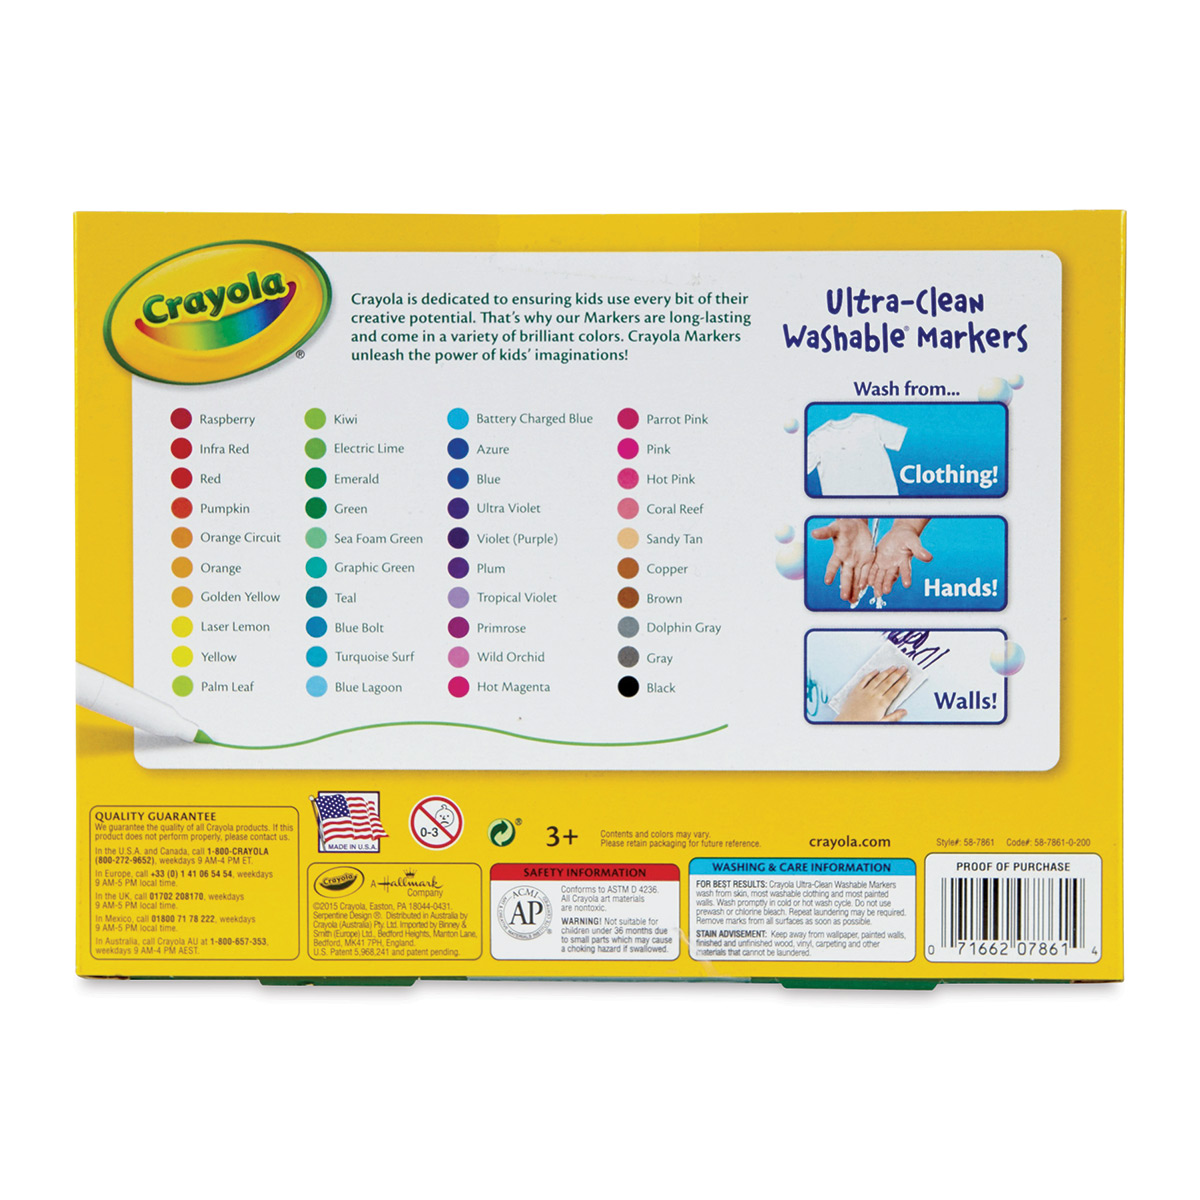 Crayola Ultra-Clean Washable Markers - 10 Assorted Colors, Thin